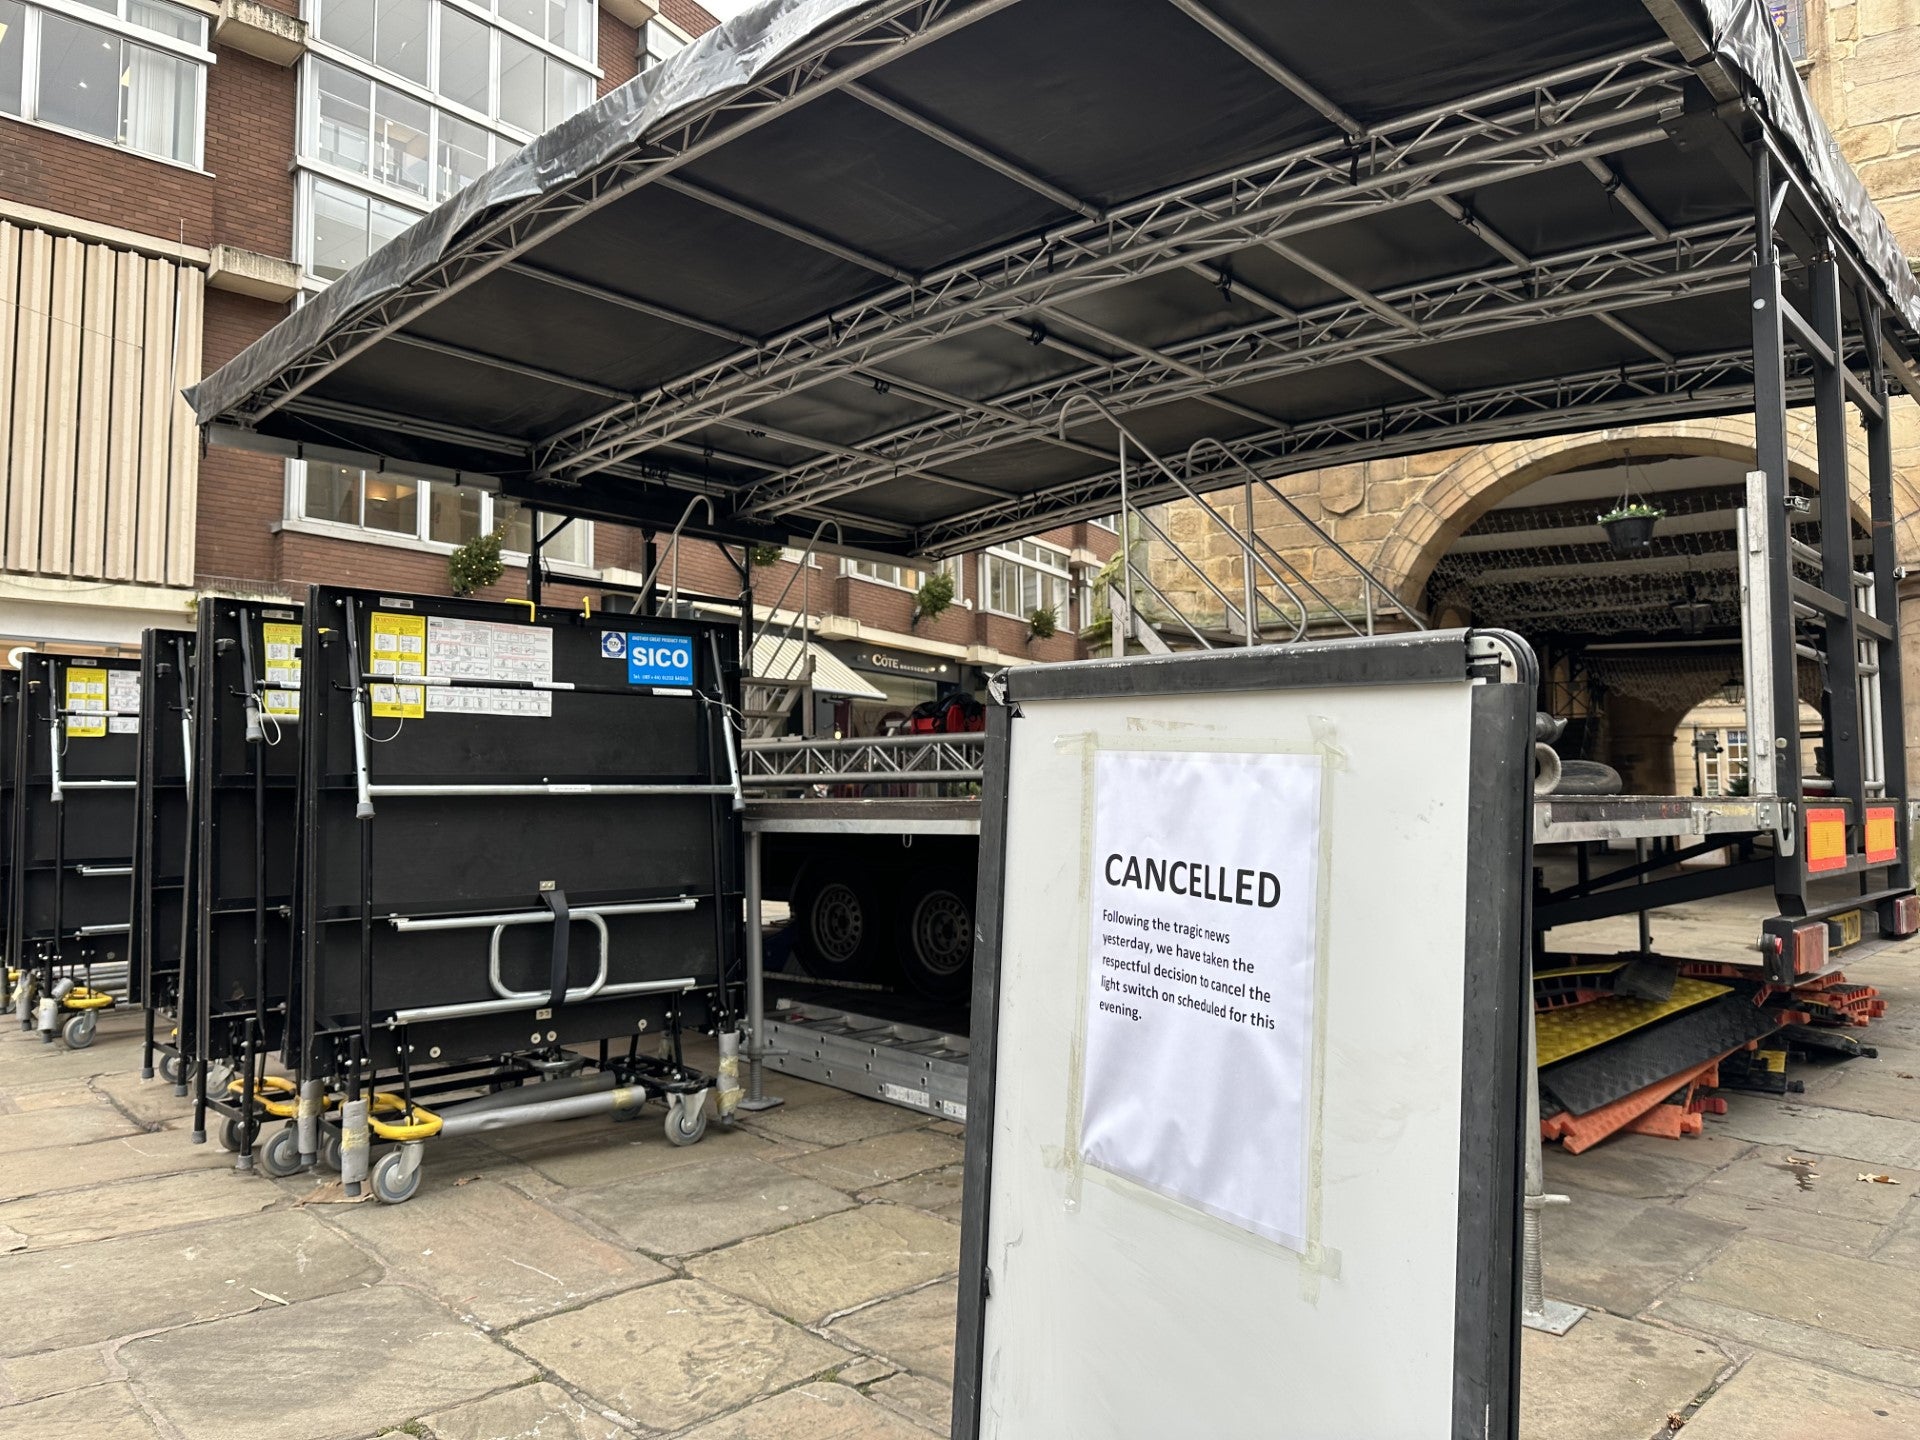 Preparations were well underway for the Christmas lights switch-on, which was cancelled on Wednesday morning